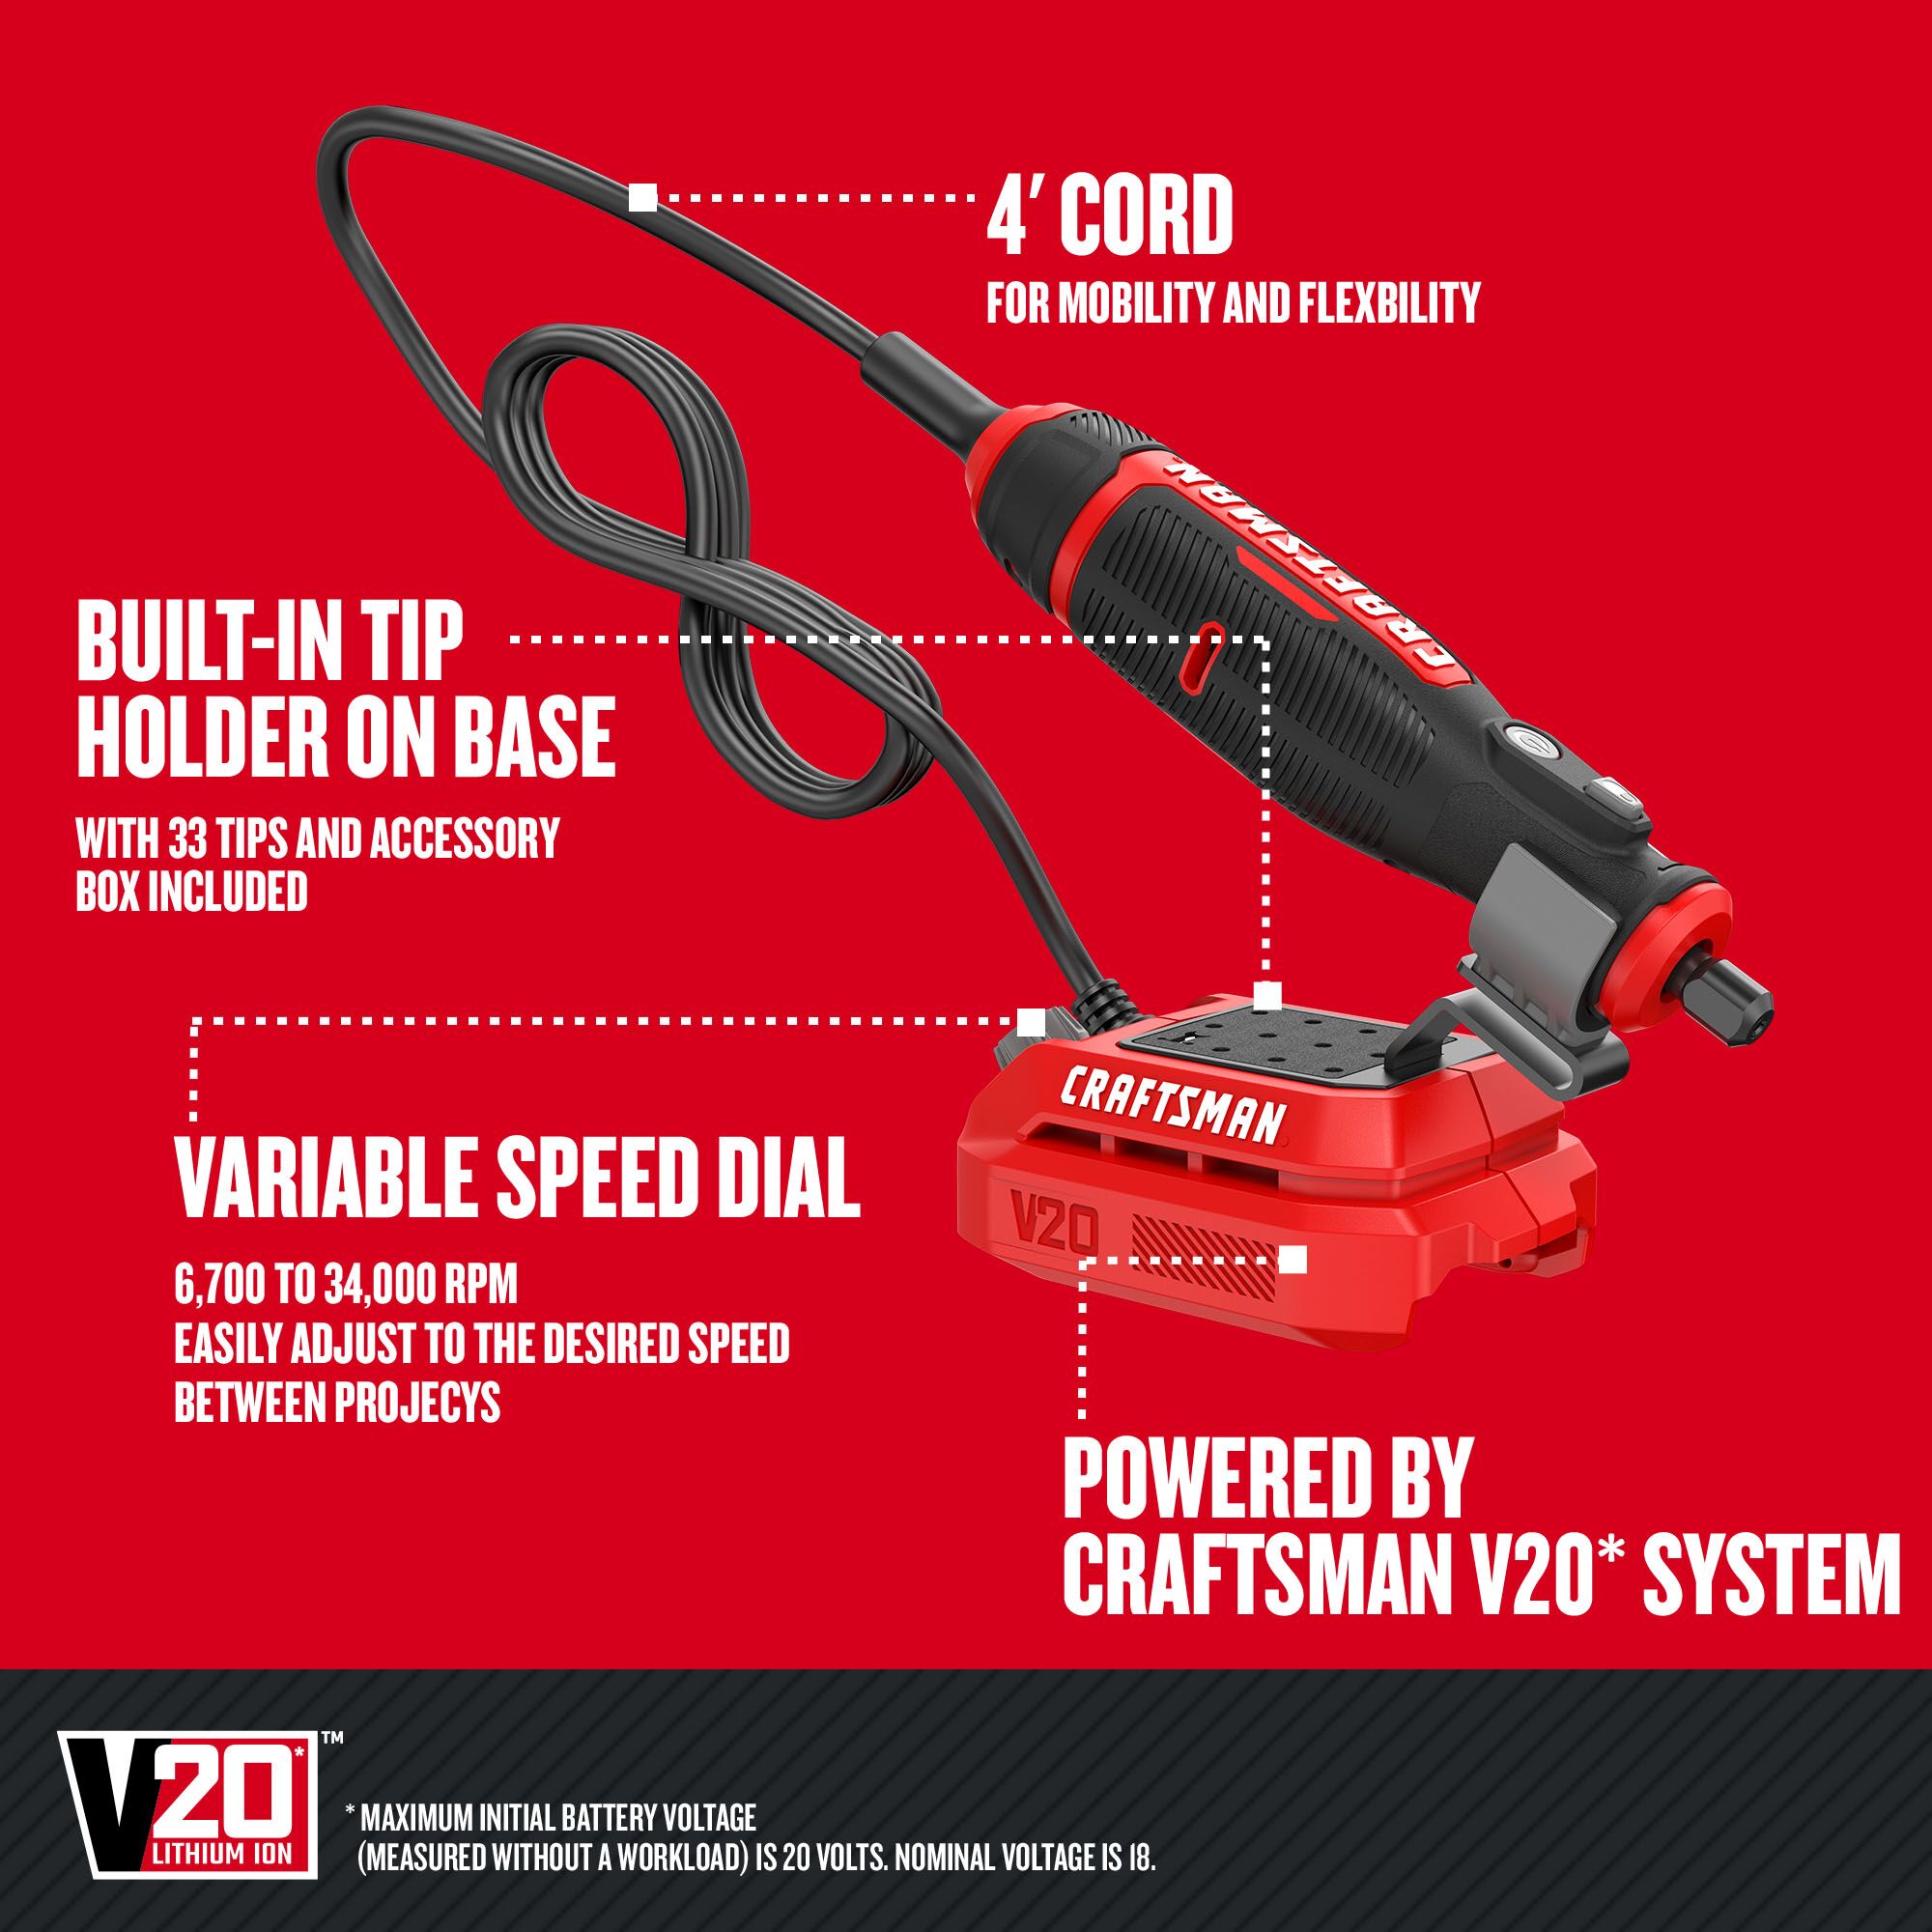 Walk-around graphic of product highlighting 4' cord, built-in tip holder on base, variable speed dial, powered by CRAFTSMAN V20 system